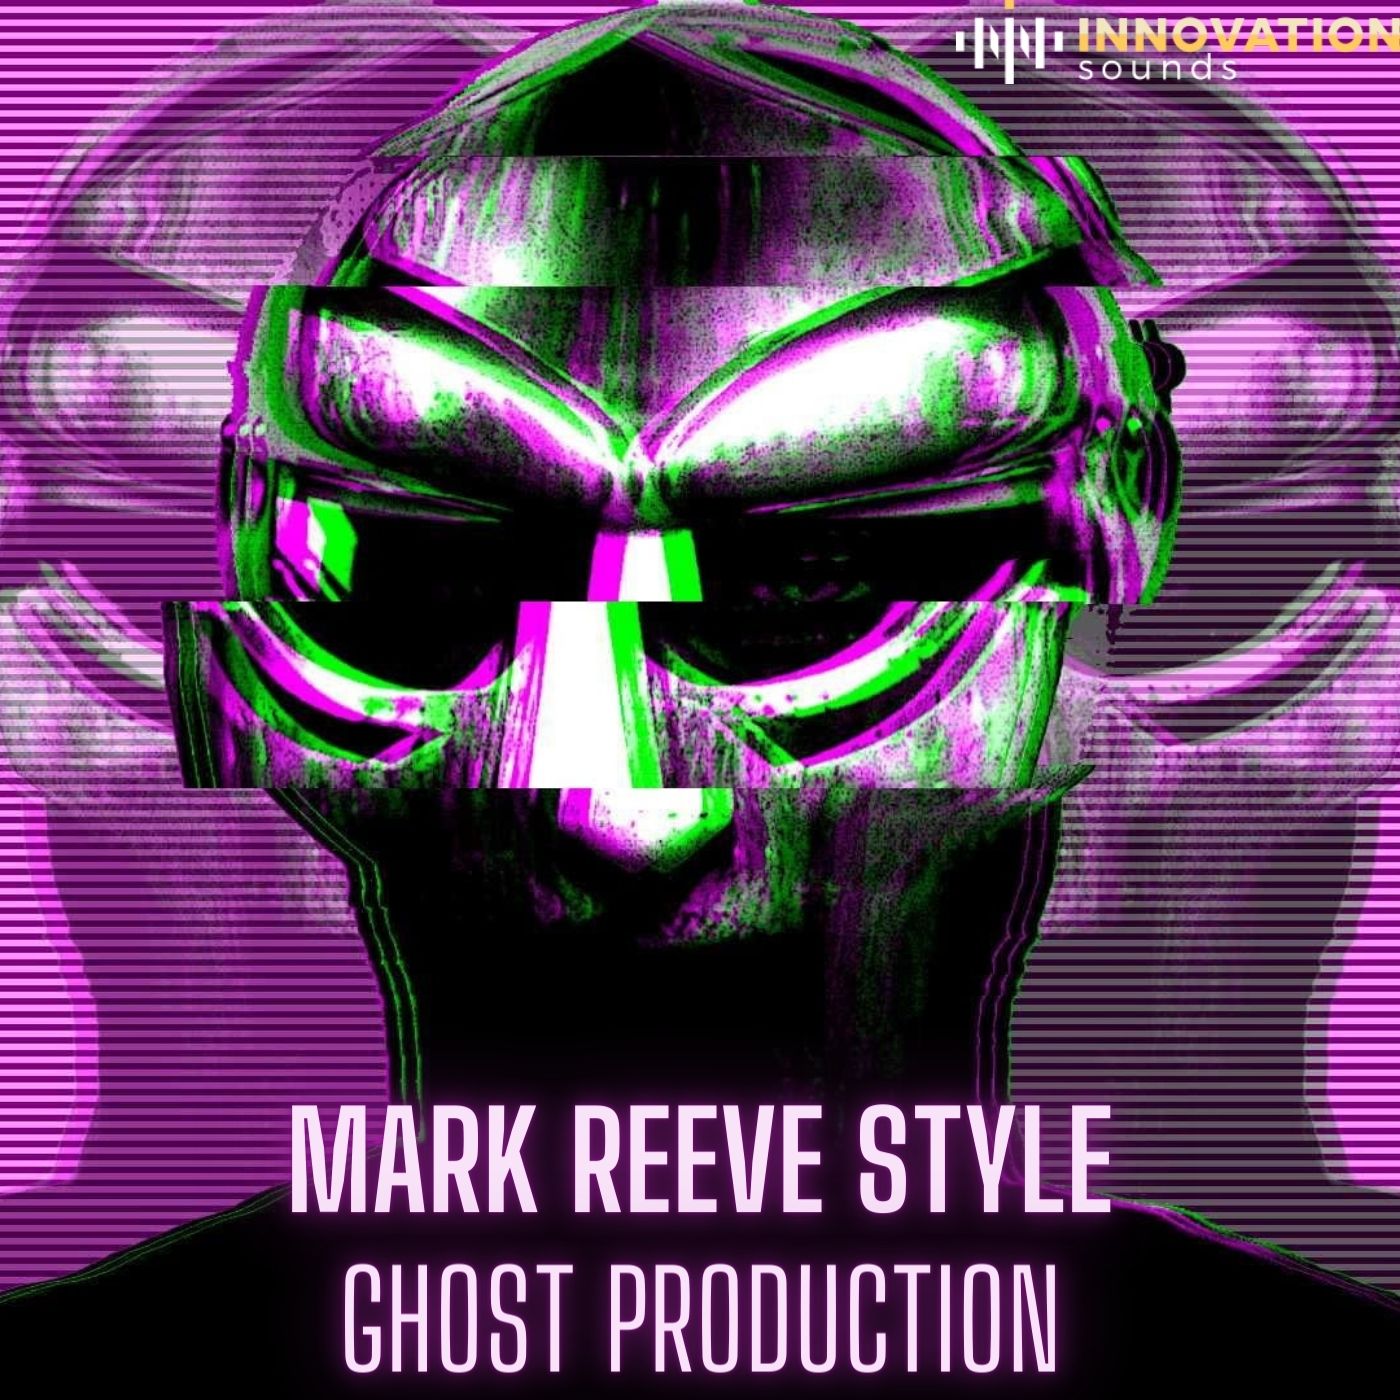 Mark Reeve Style Techno Ghost Production